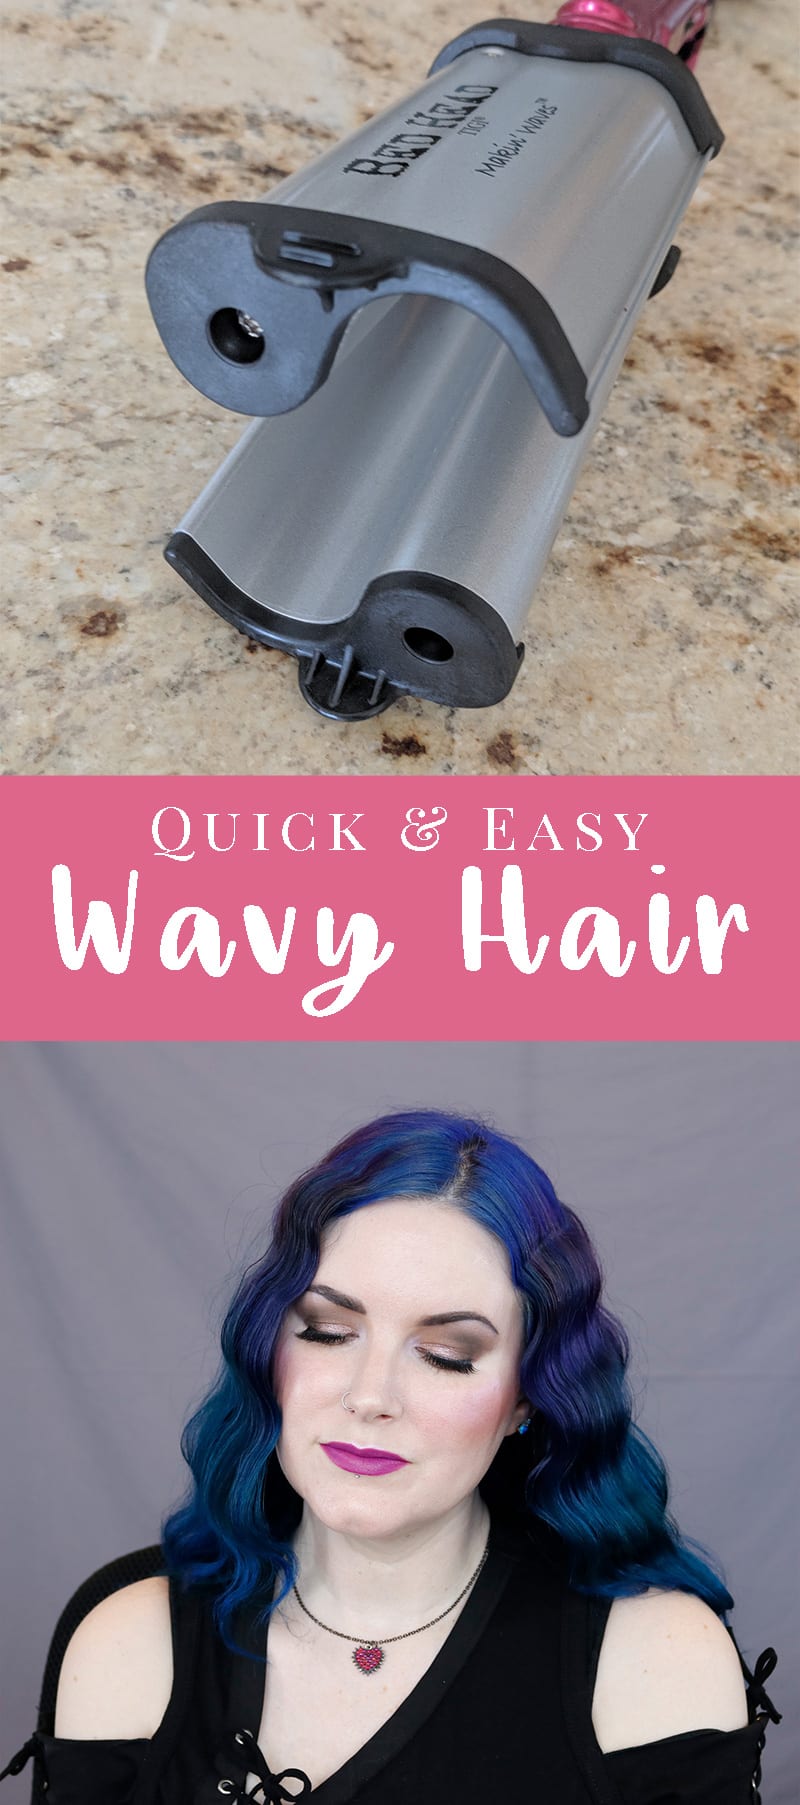 Quick and Easy Way to Get Wavy Hair - I love wavy hair, whether it's vintage waves, beachy waves, or second day braids. The Bed Head Makin' Waves S Waver is perfect for vintage waves. #hair #hairstyle #tutorial